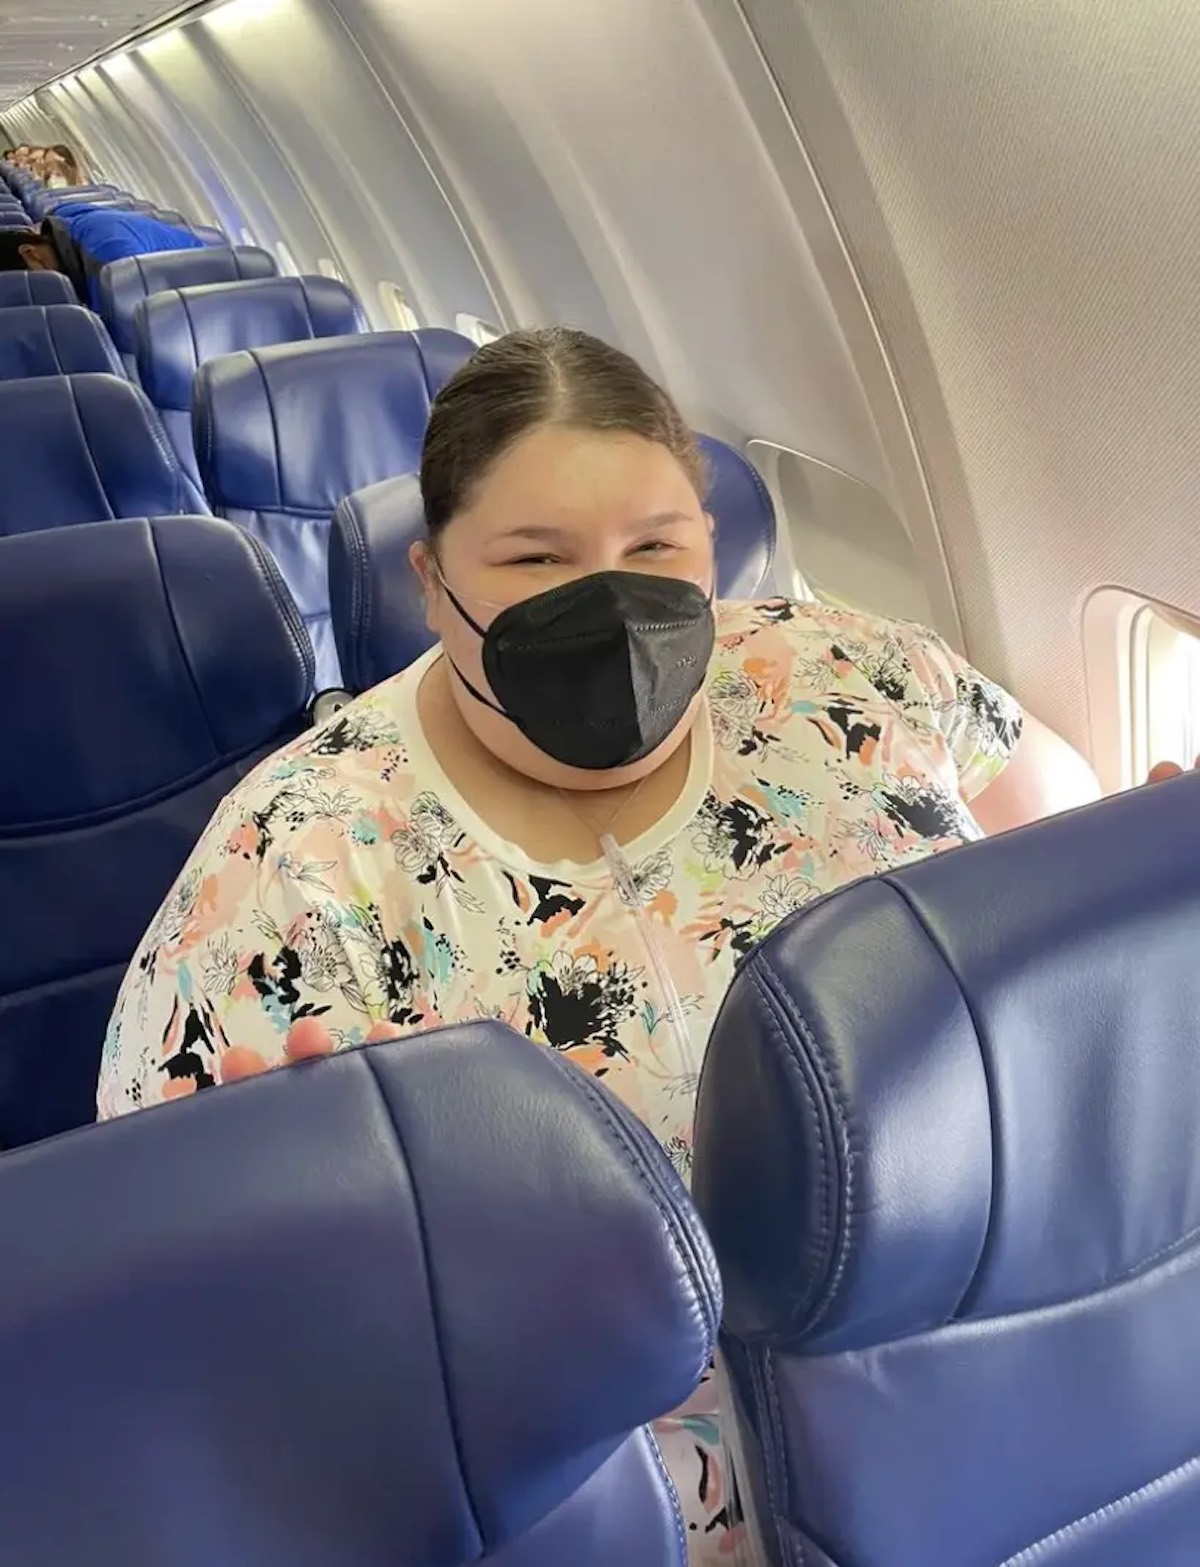 Passenger Of Size Demands Larger Seats On Taxpayer's Dime - Live and Let's Fly